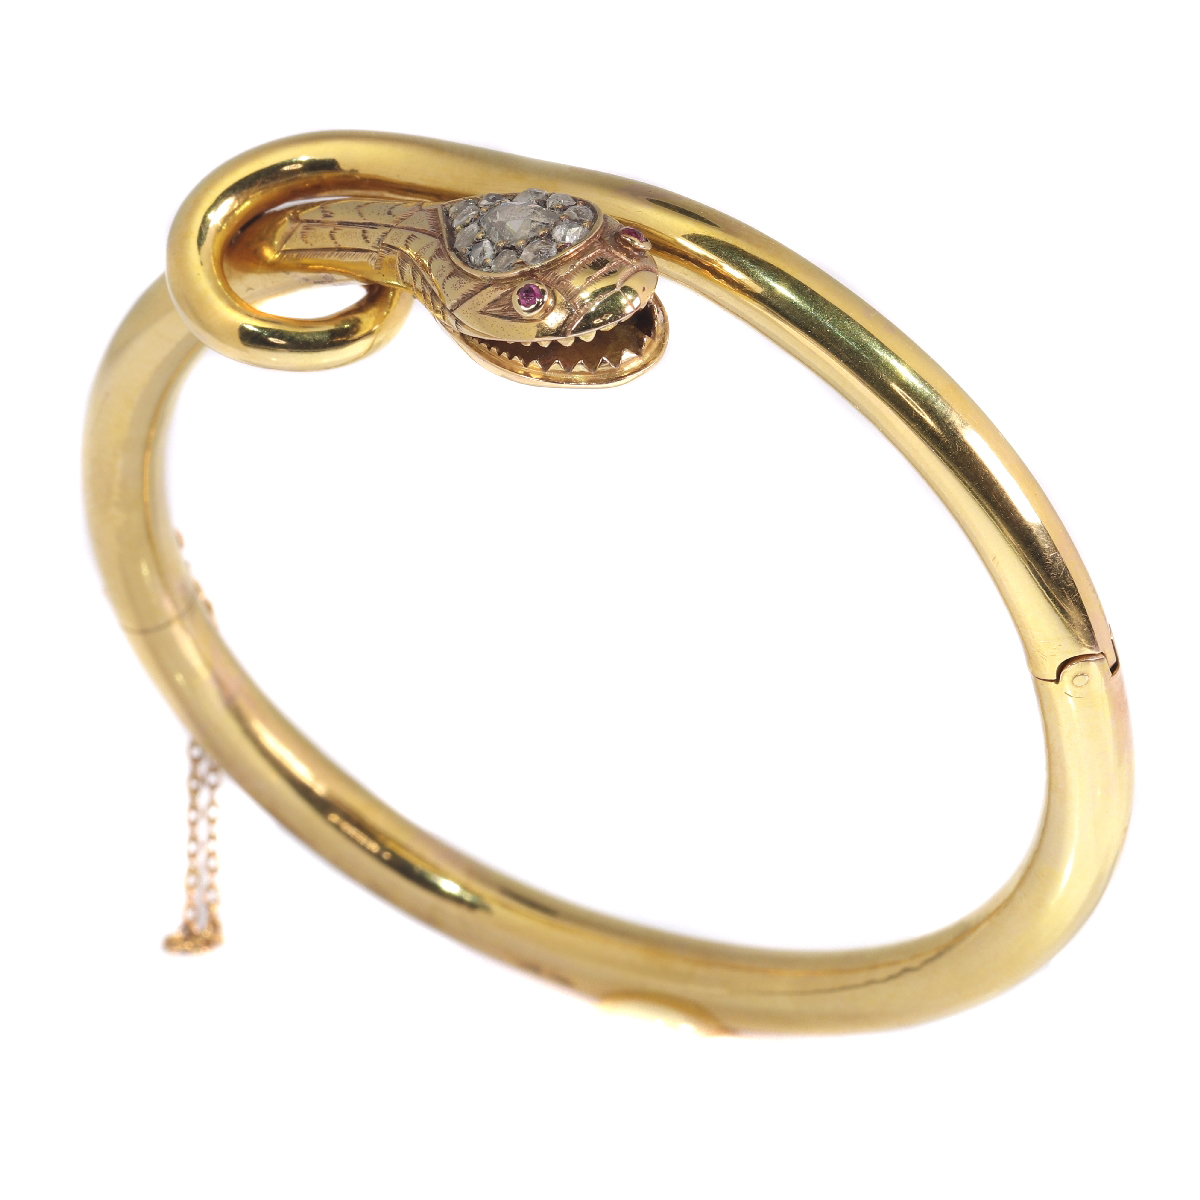 Victorian Serpent Bangle: A Circle of Mystique and Grace